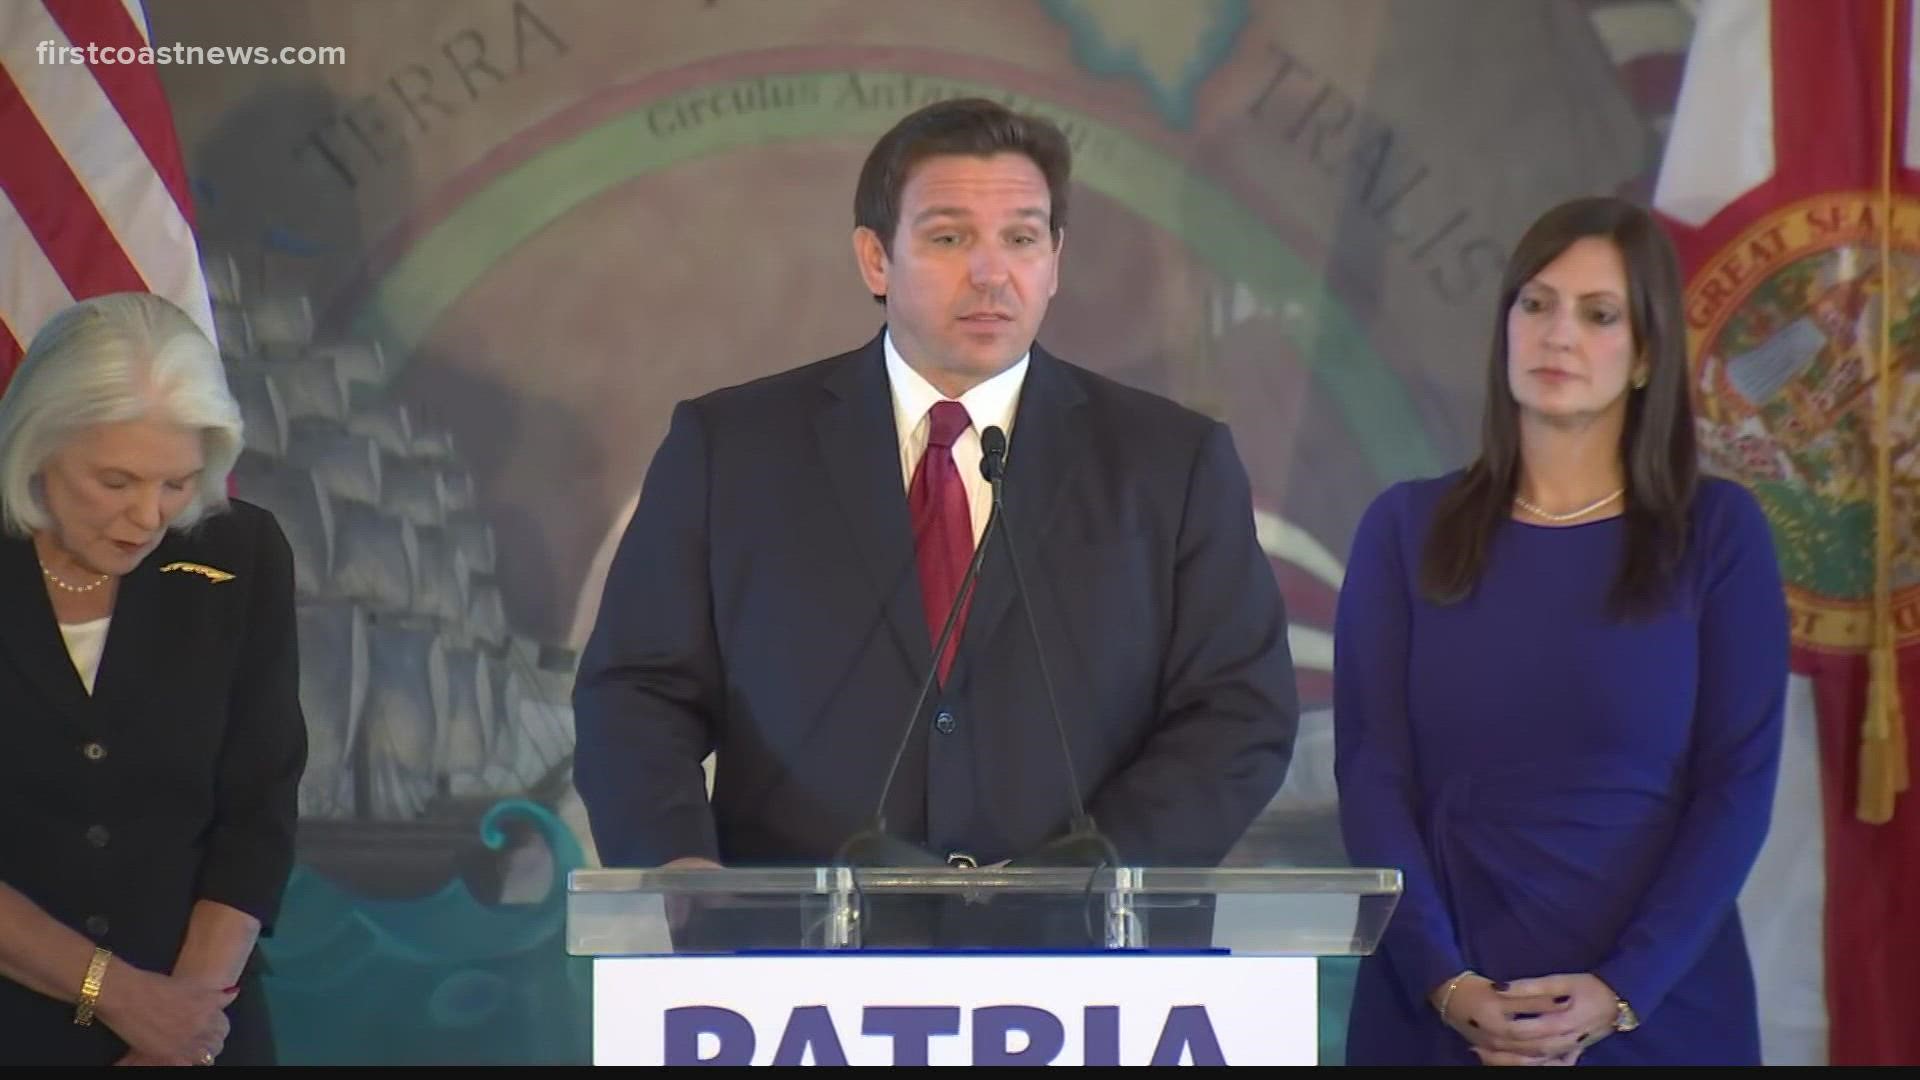 Their remarks came amid DeSantis' announcement of $25 million to restore the Freedom Tower in Miami.